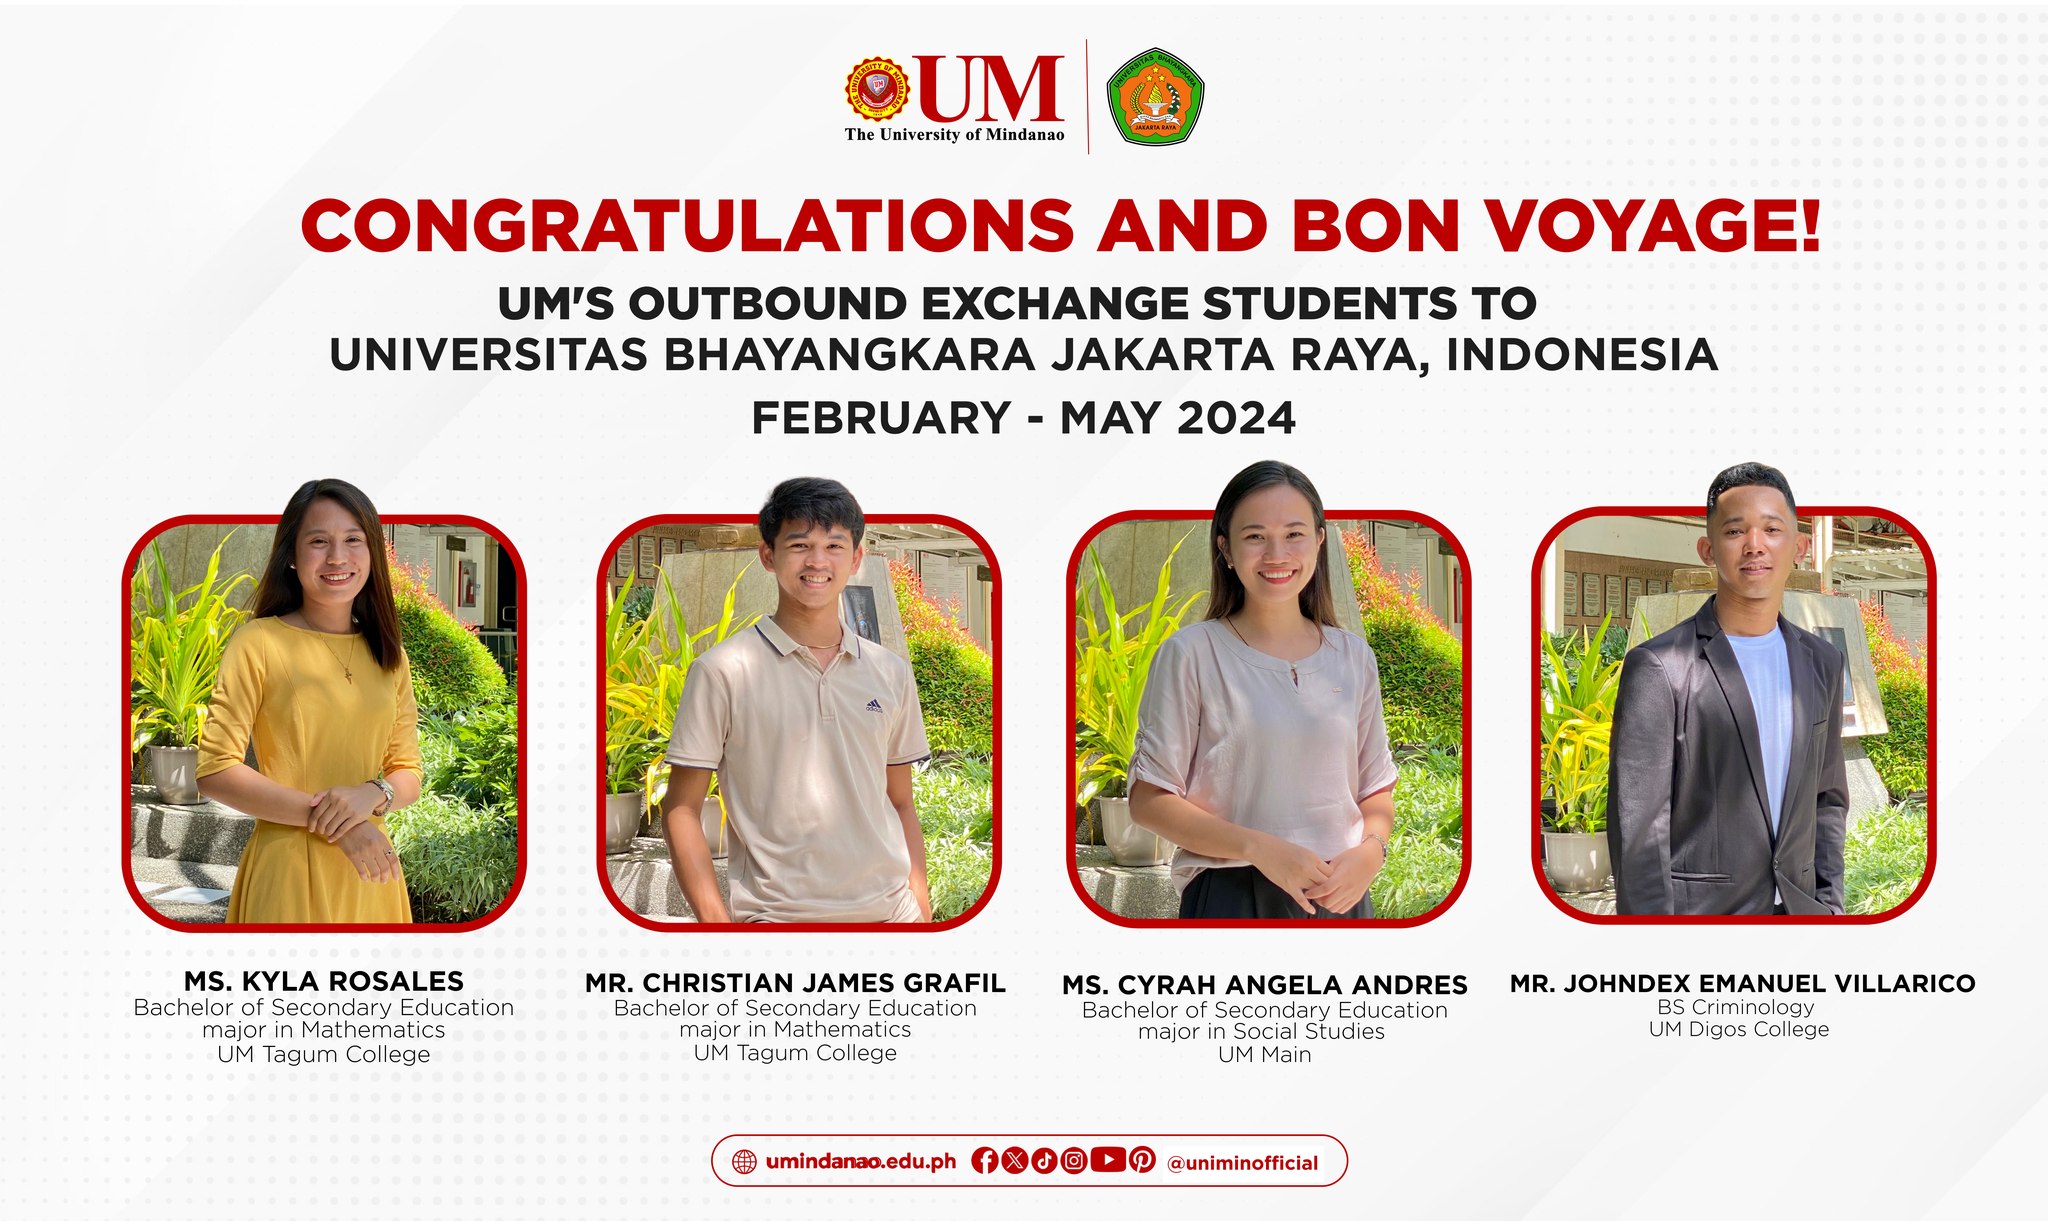 4 UM students head to Indonesia for 3-month exchange program